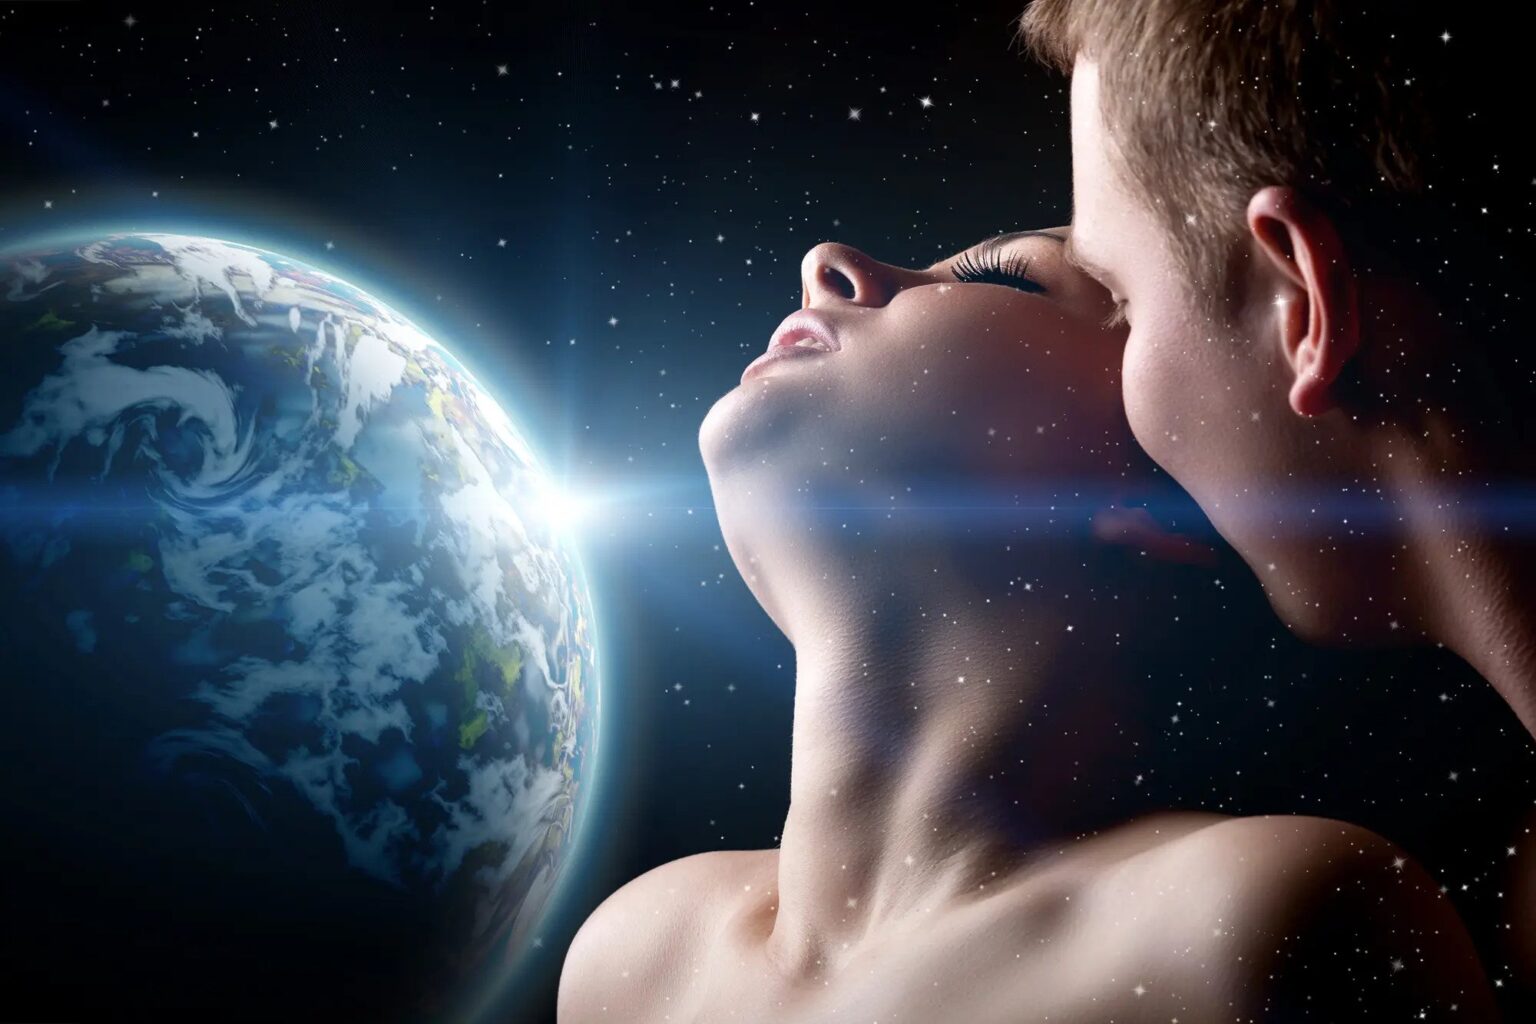 Scientists are interested in sex in space image